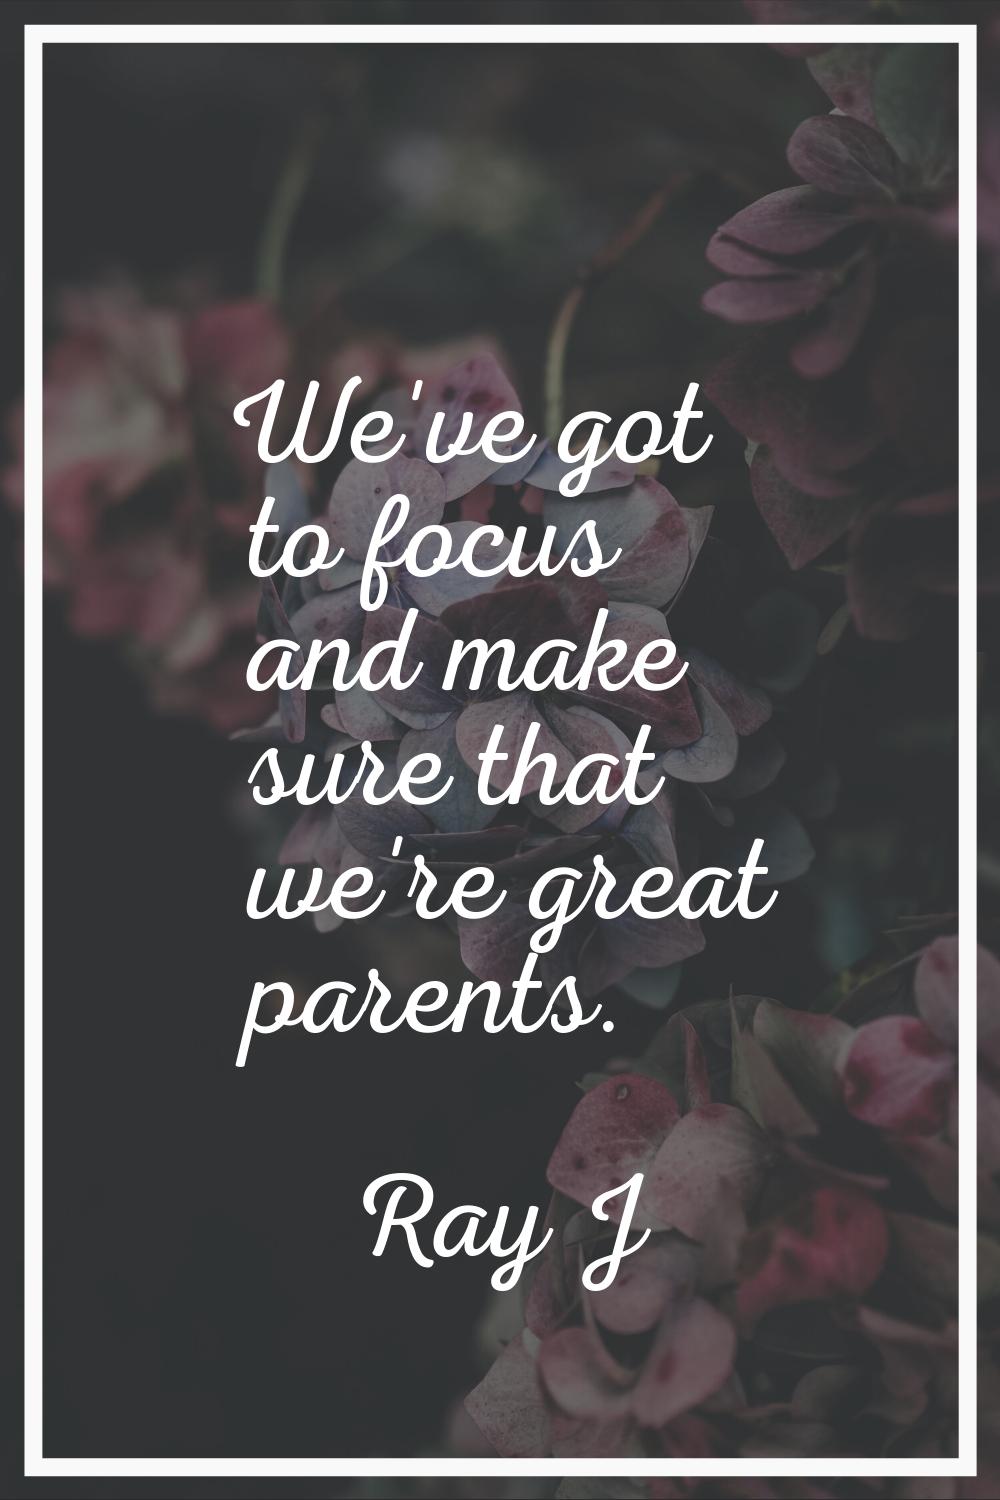 We've got to focus and make sure that we're great parents.